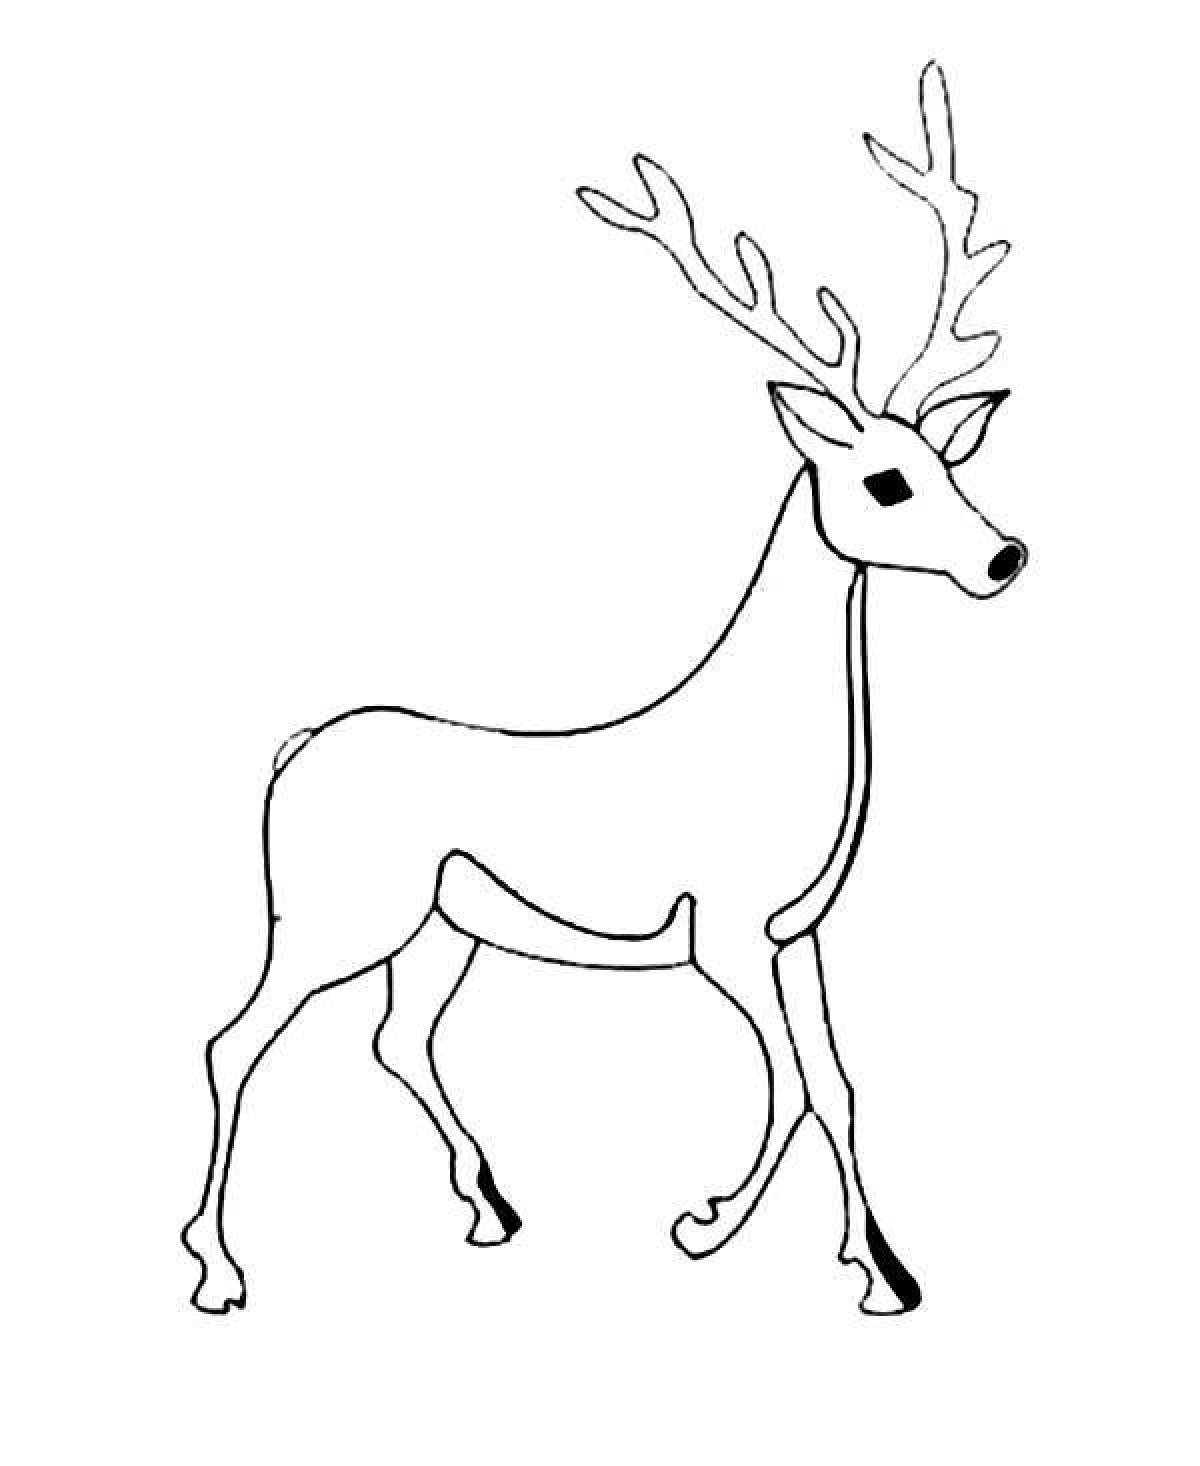 Incredible silver hoof coloring book for little ones